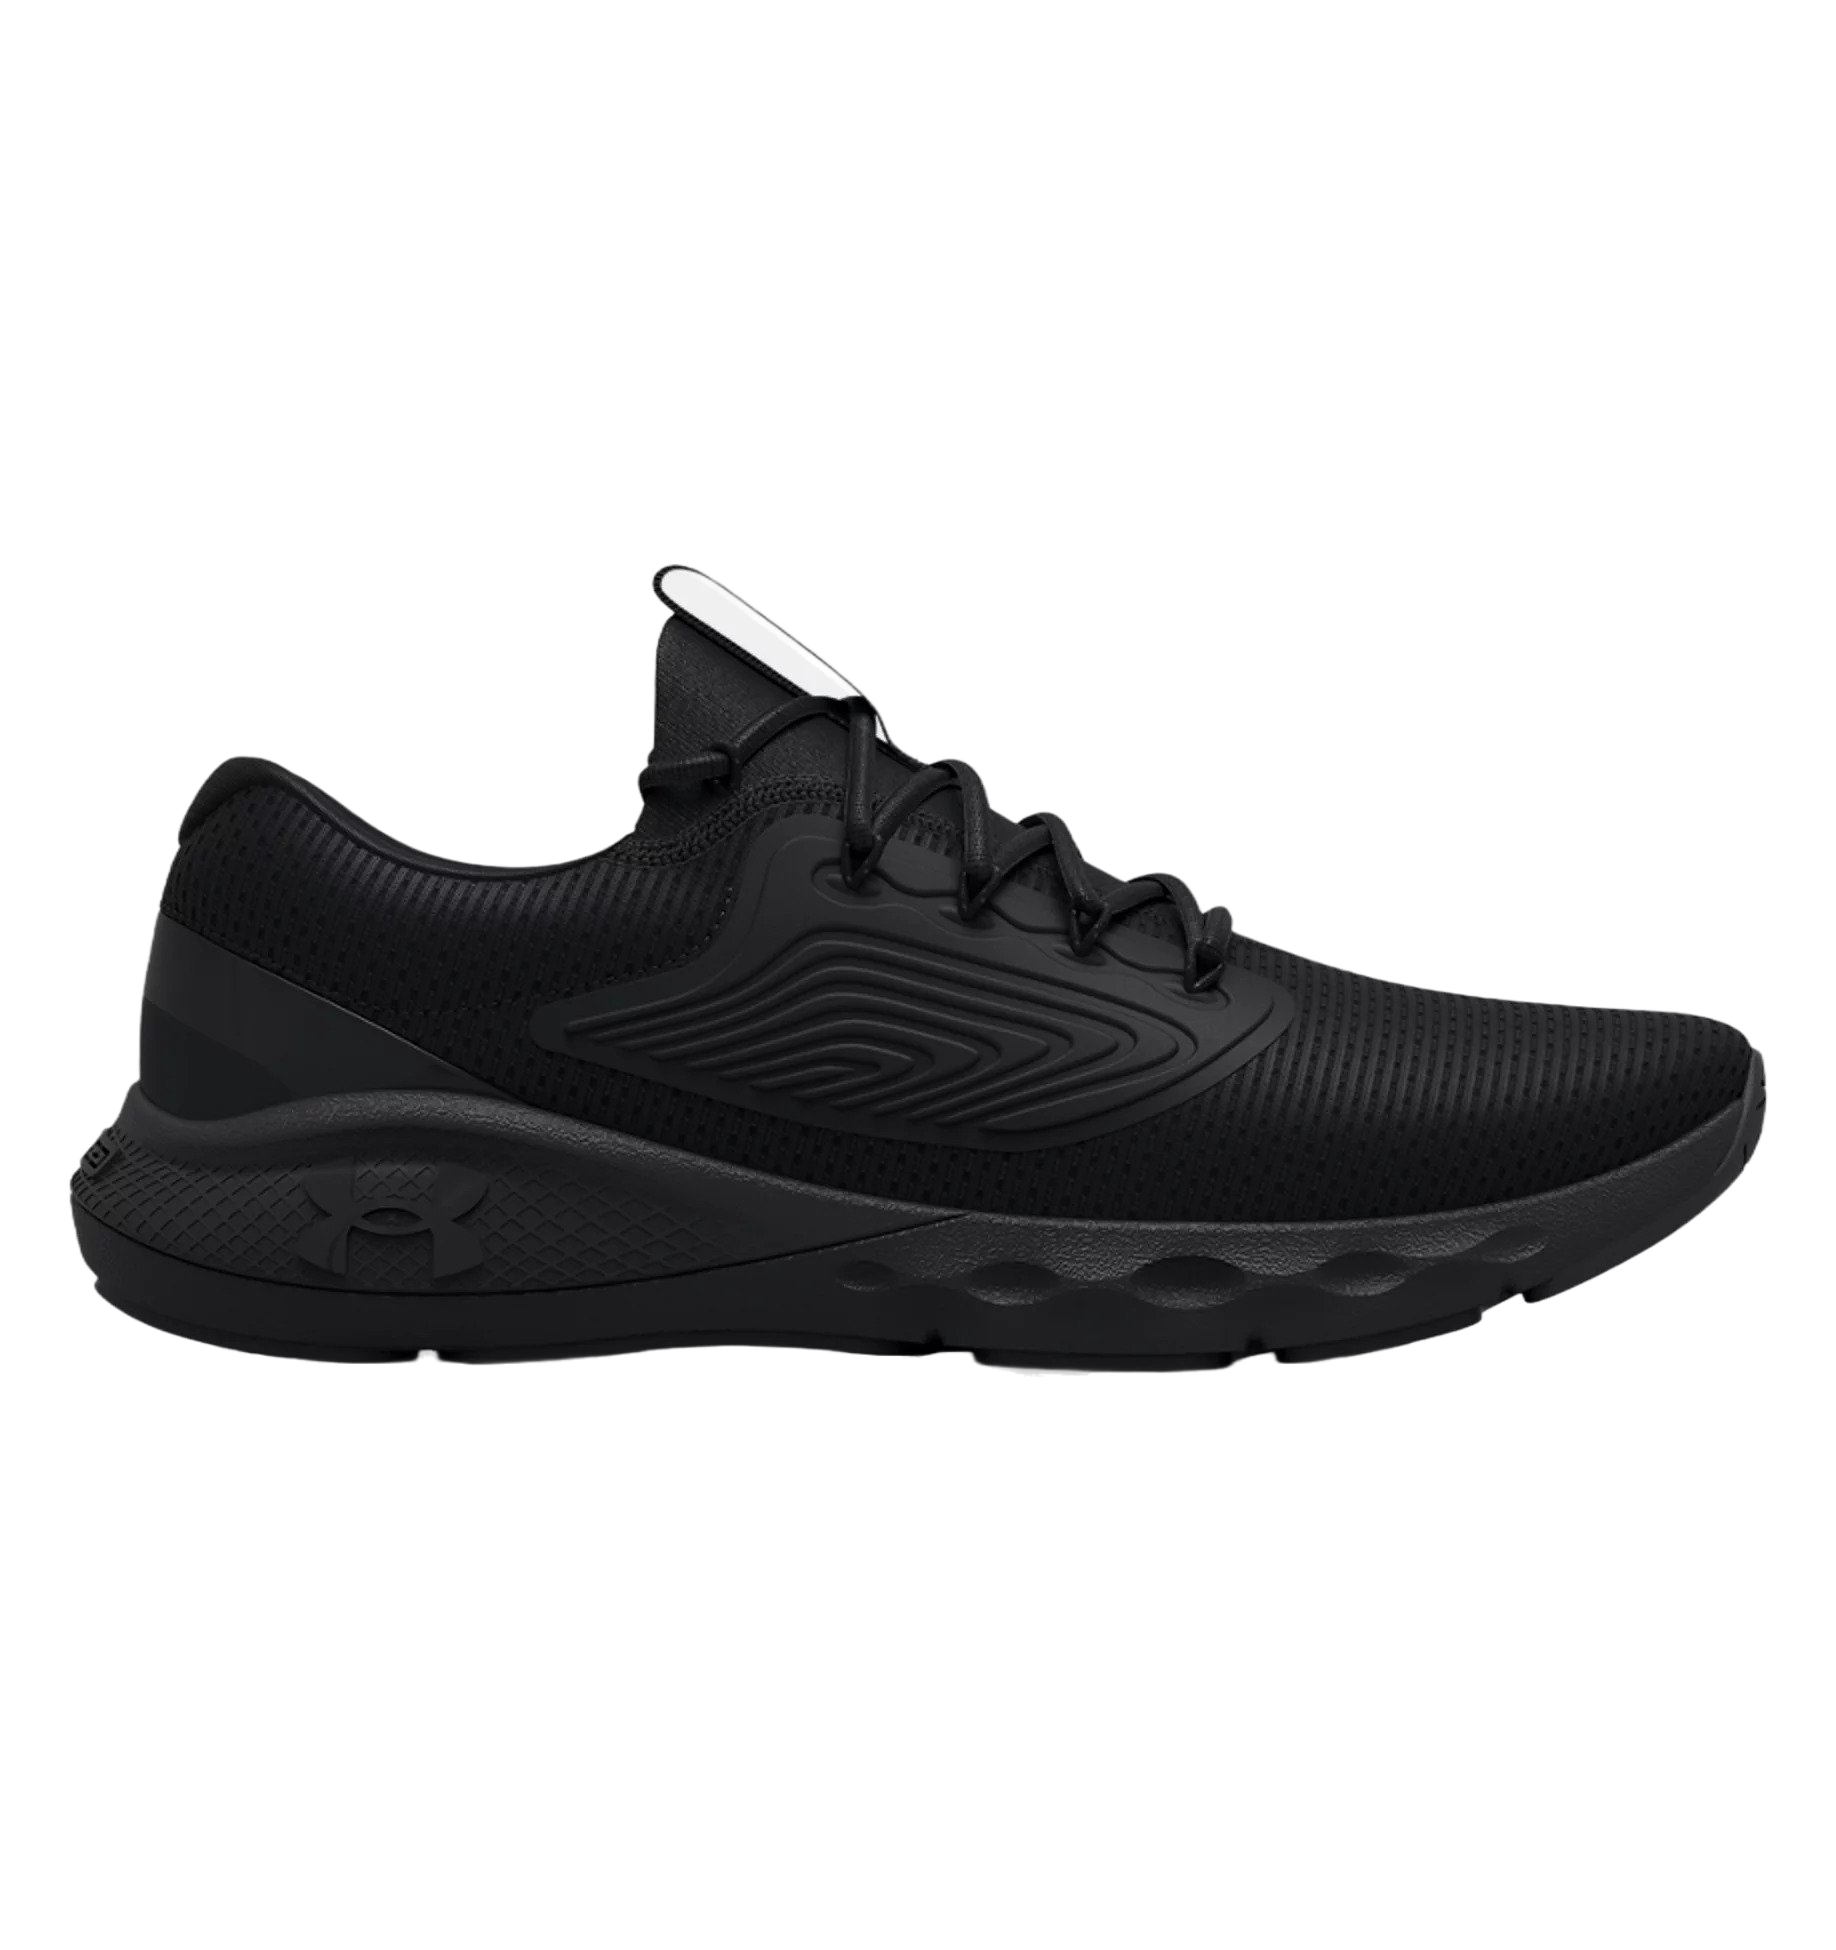 Under Armour Charged Vantage 2 - Wide - Mens